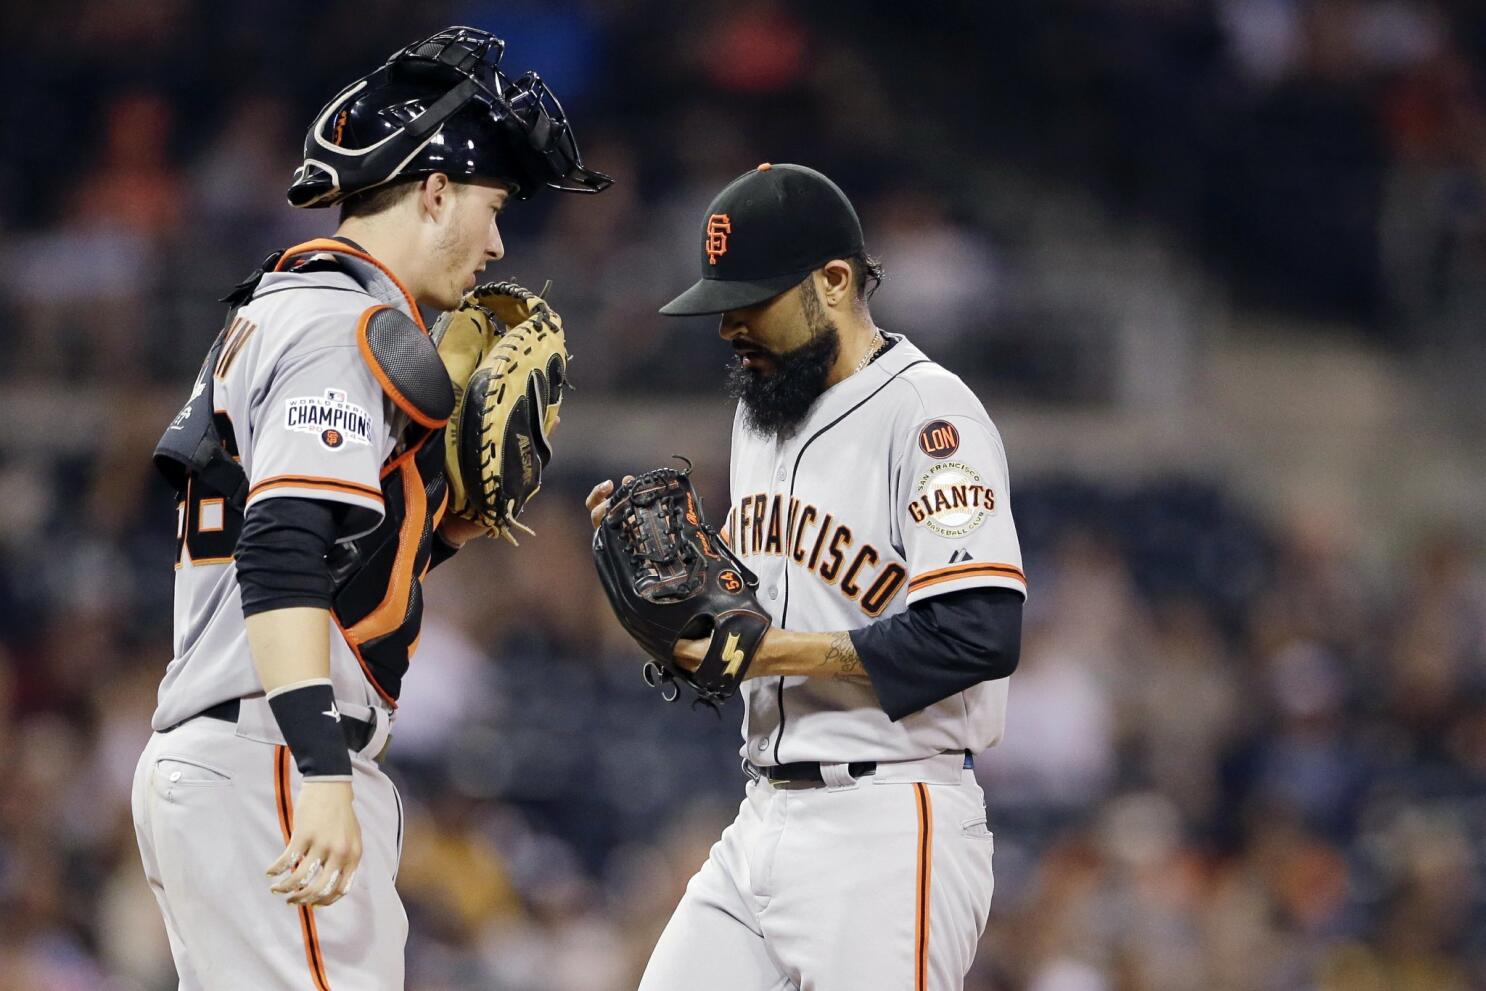 Jake Peavy pitches Giants to 9-1 win against Padres